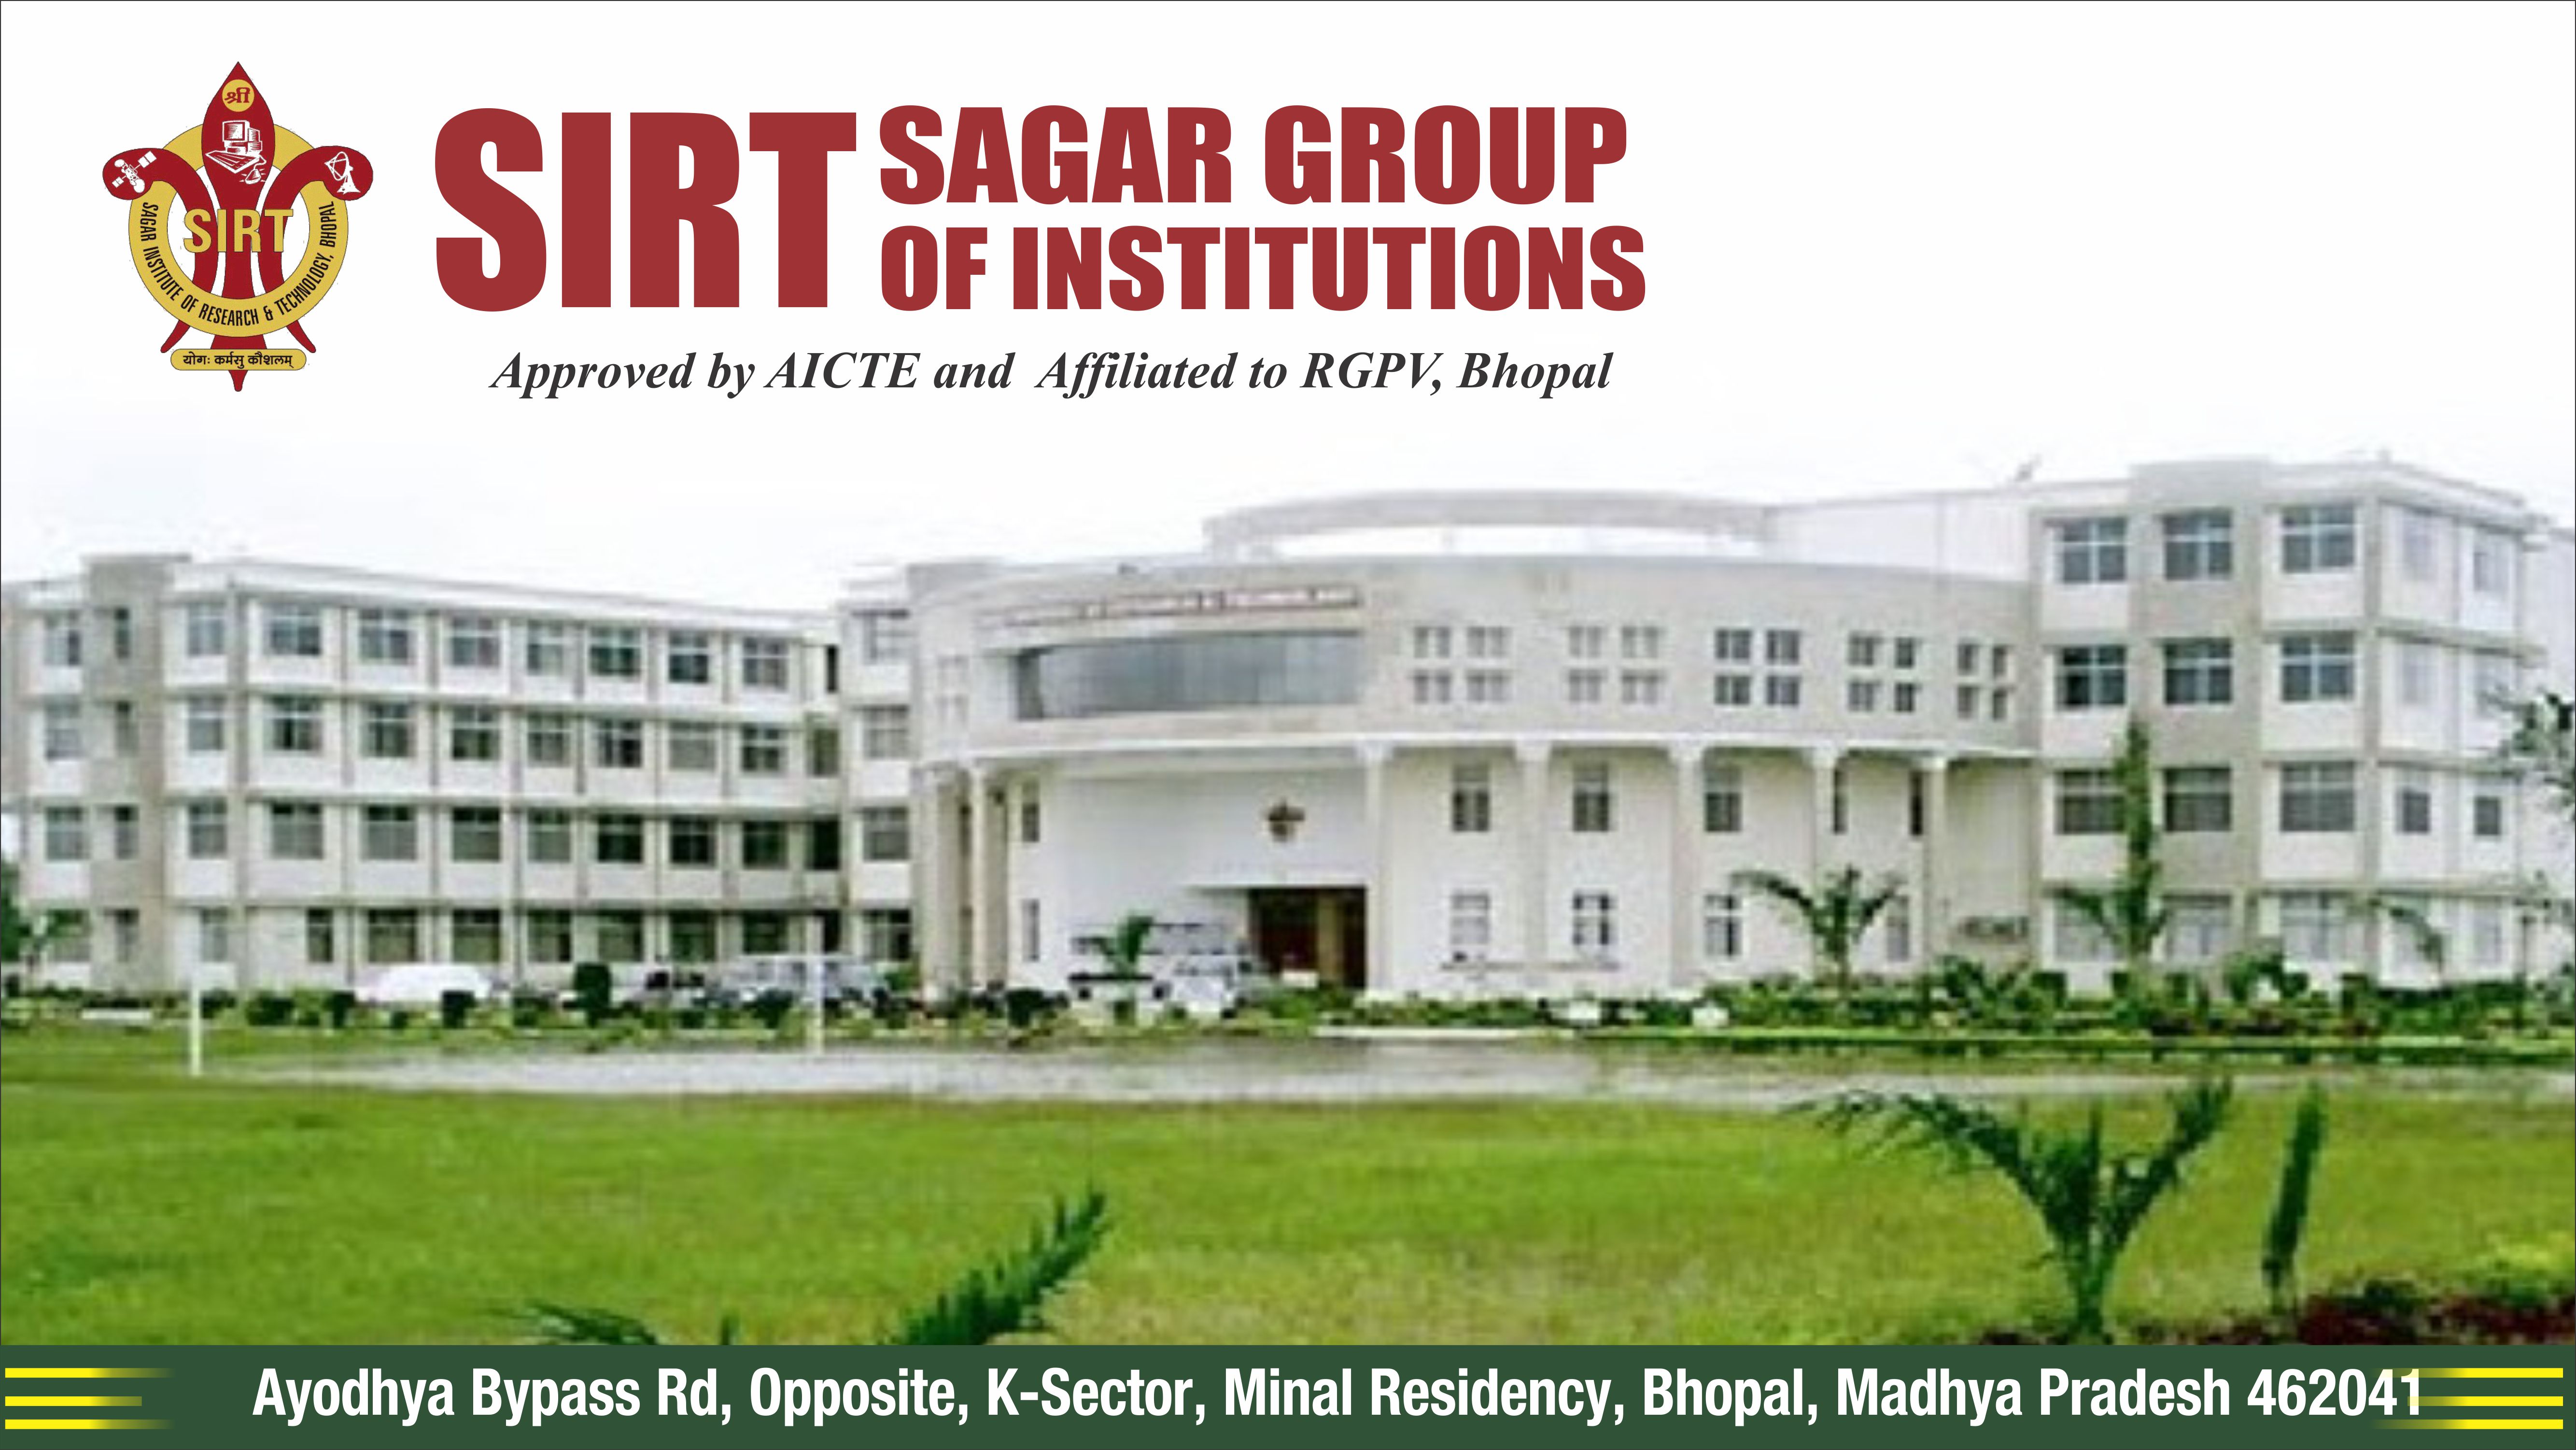 out side view of Sagar Institute of Research & Technology, Bhopal